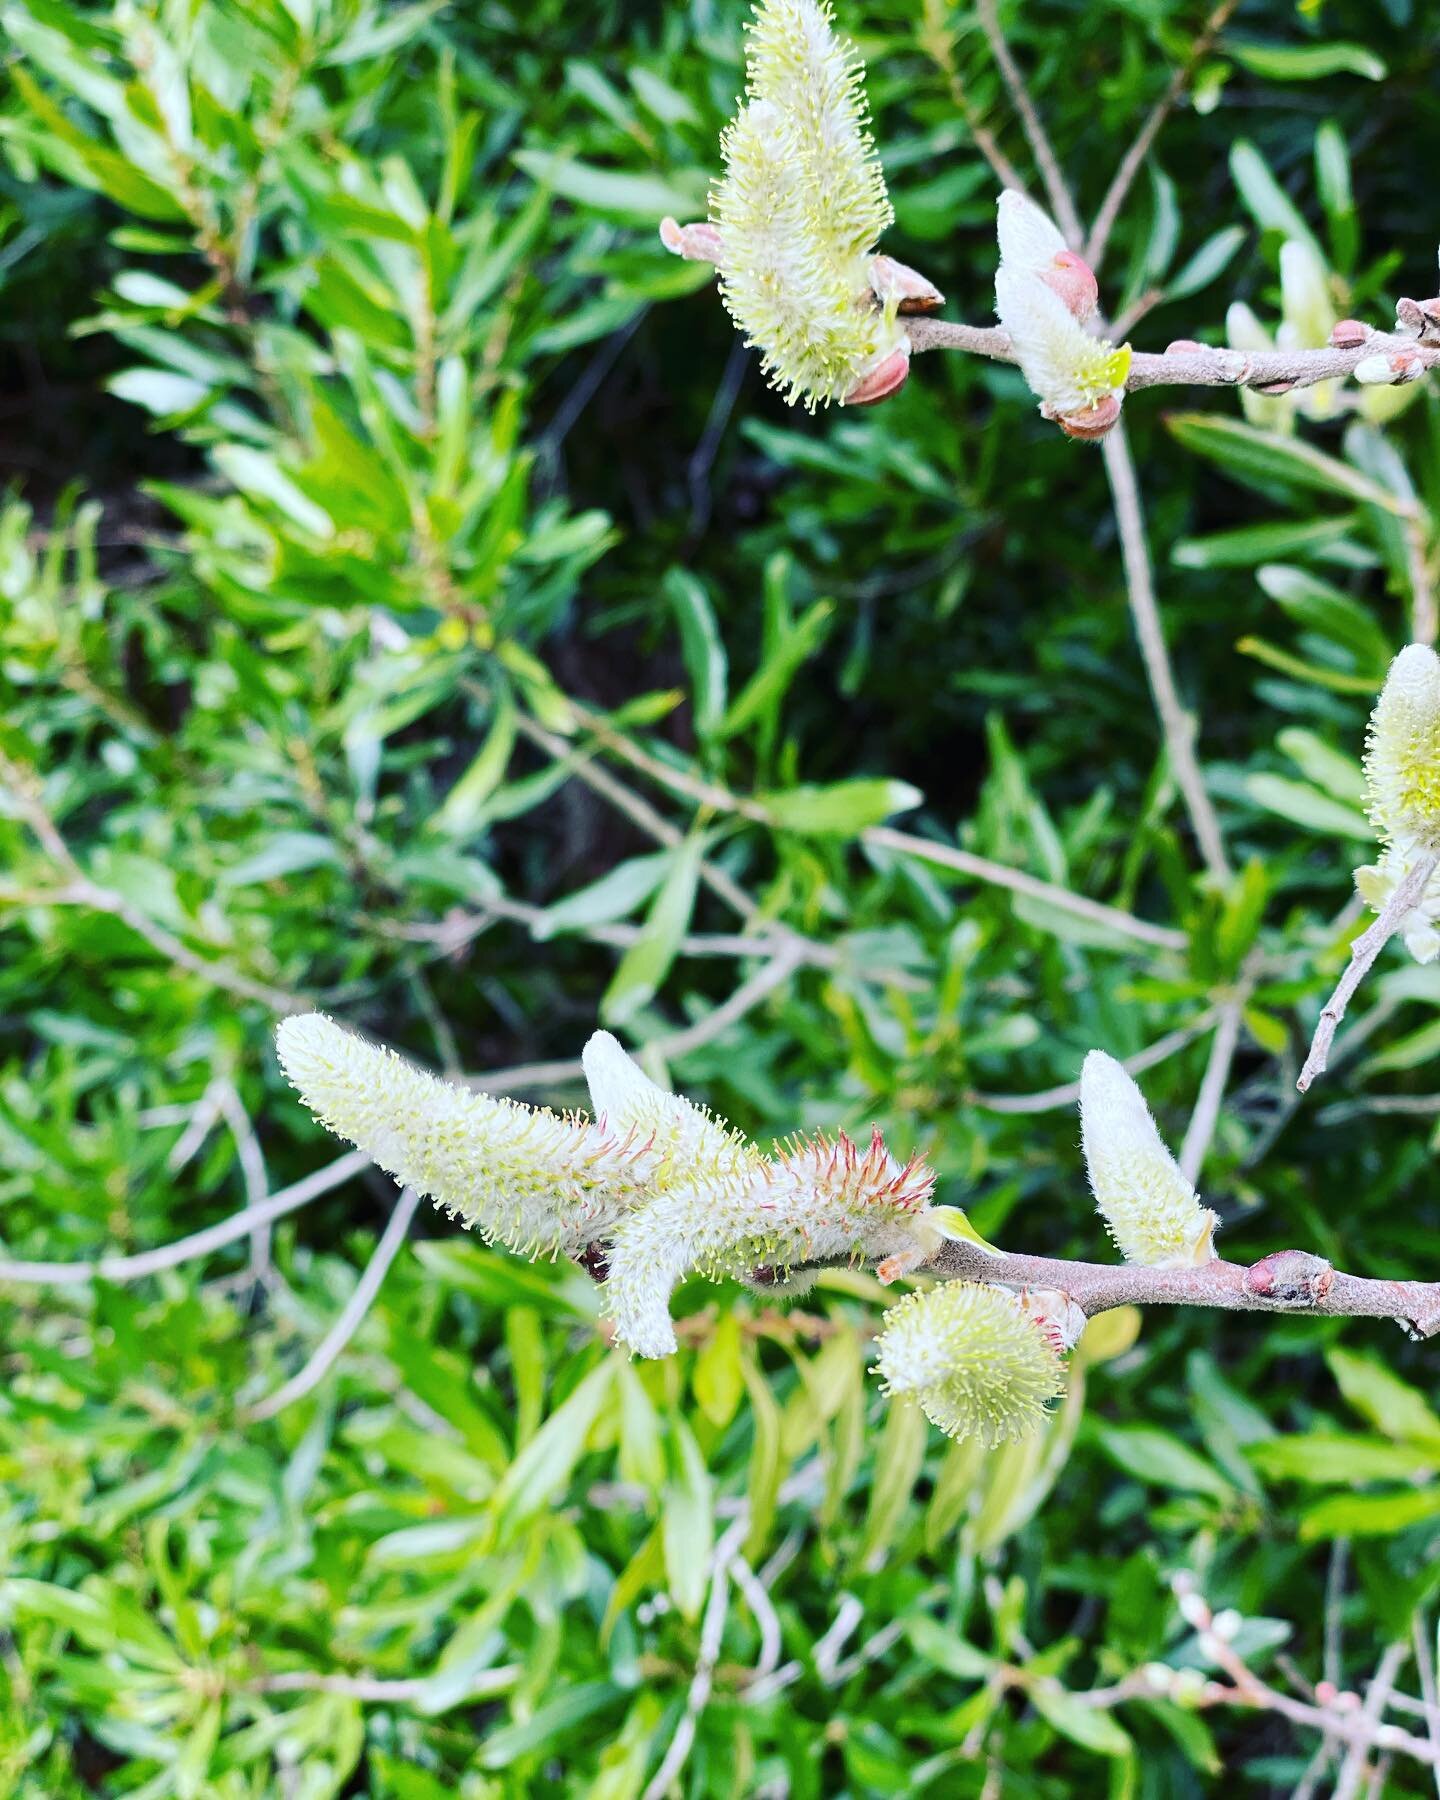 Pussy willow just starting to bloom. Happy first day of spring!

#spring #firstdayofspring #signofspring #nature